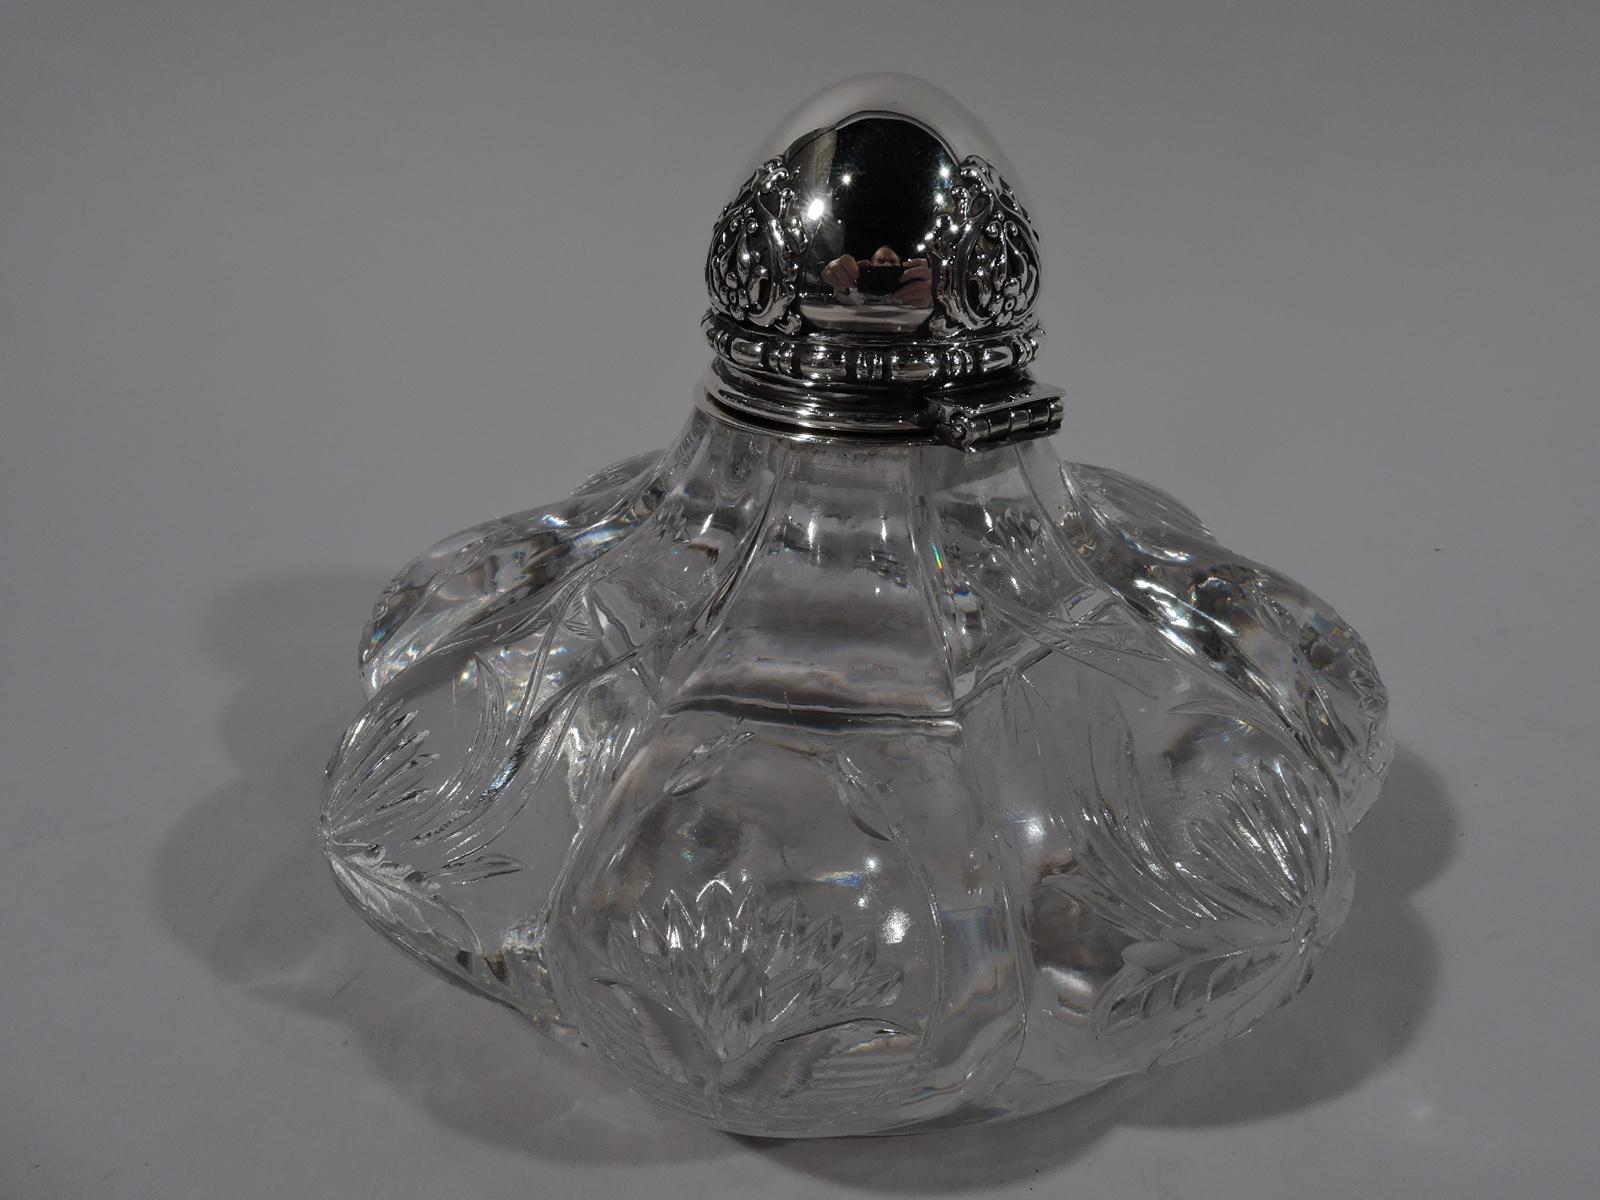 Art Nouveau sterling silver and clear glass inkwell. Made by Tiffany & Co. in New York. Bellied and lobed clear glass base with short inset foot and carved and engraved stylized flowers. Short neck with sterling silver collar and hinged ball cover